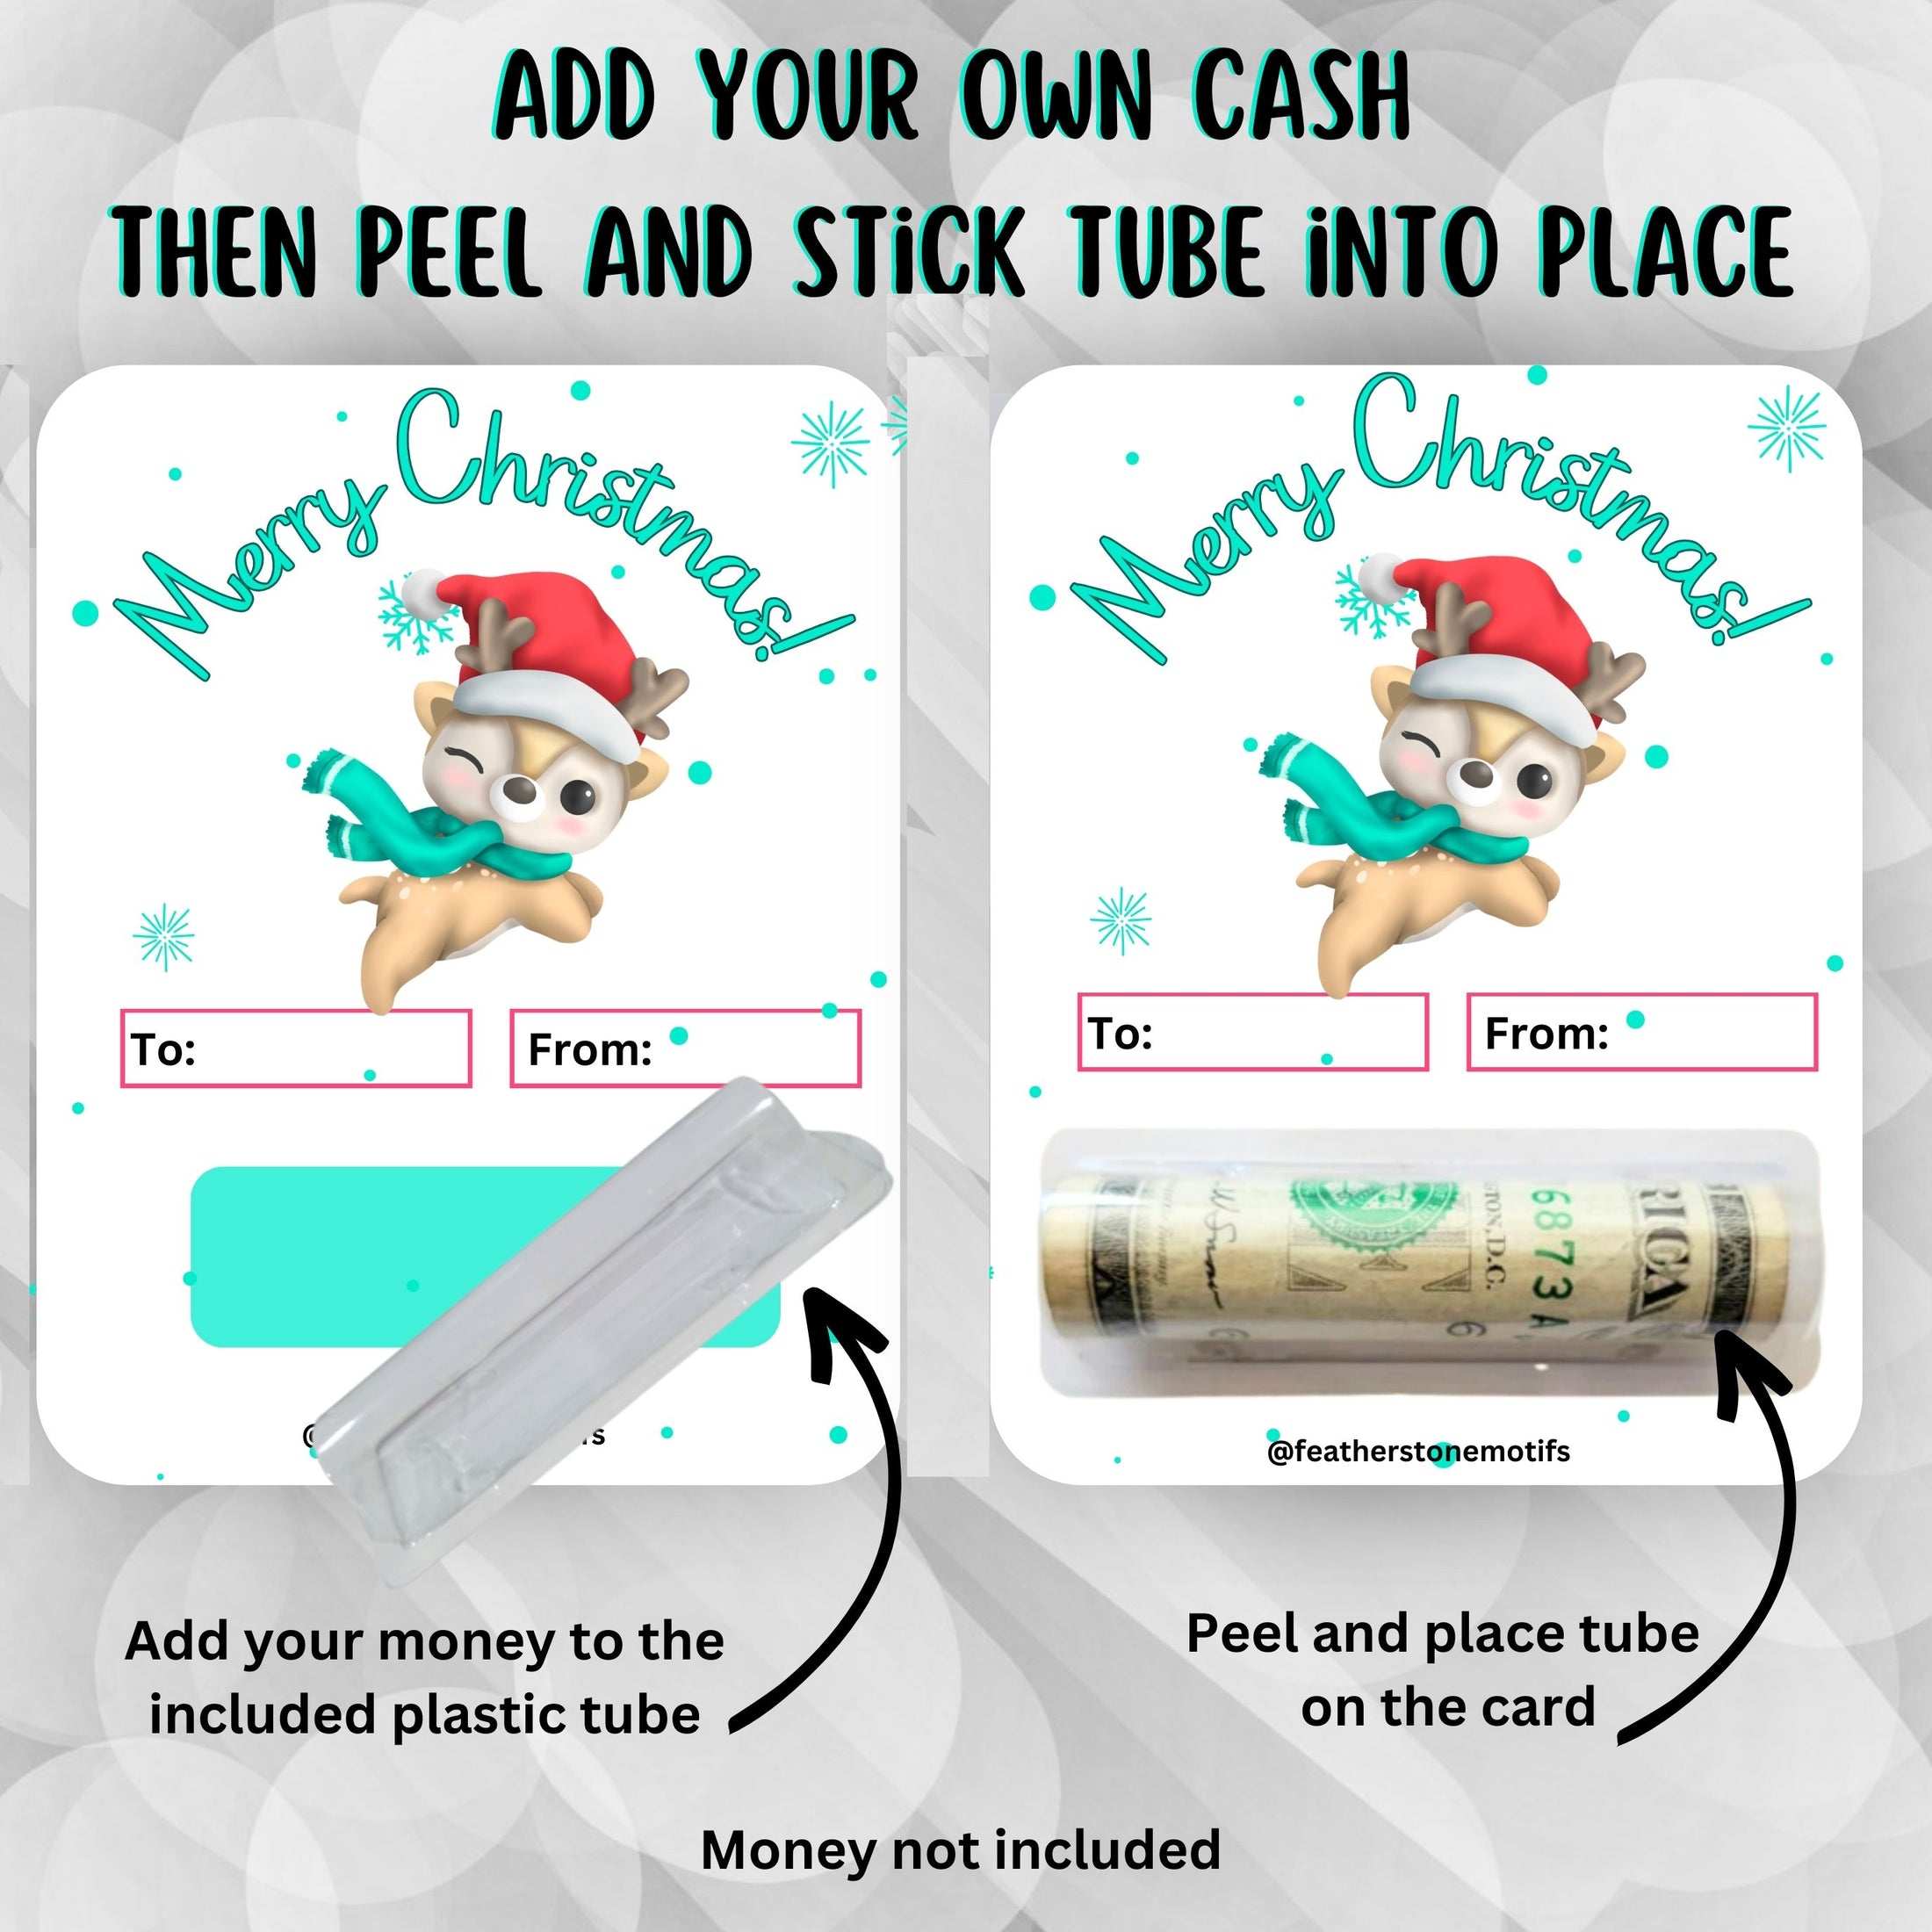 This image shows how to apply the money tube to the Christmas Reindeer money card.